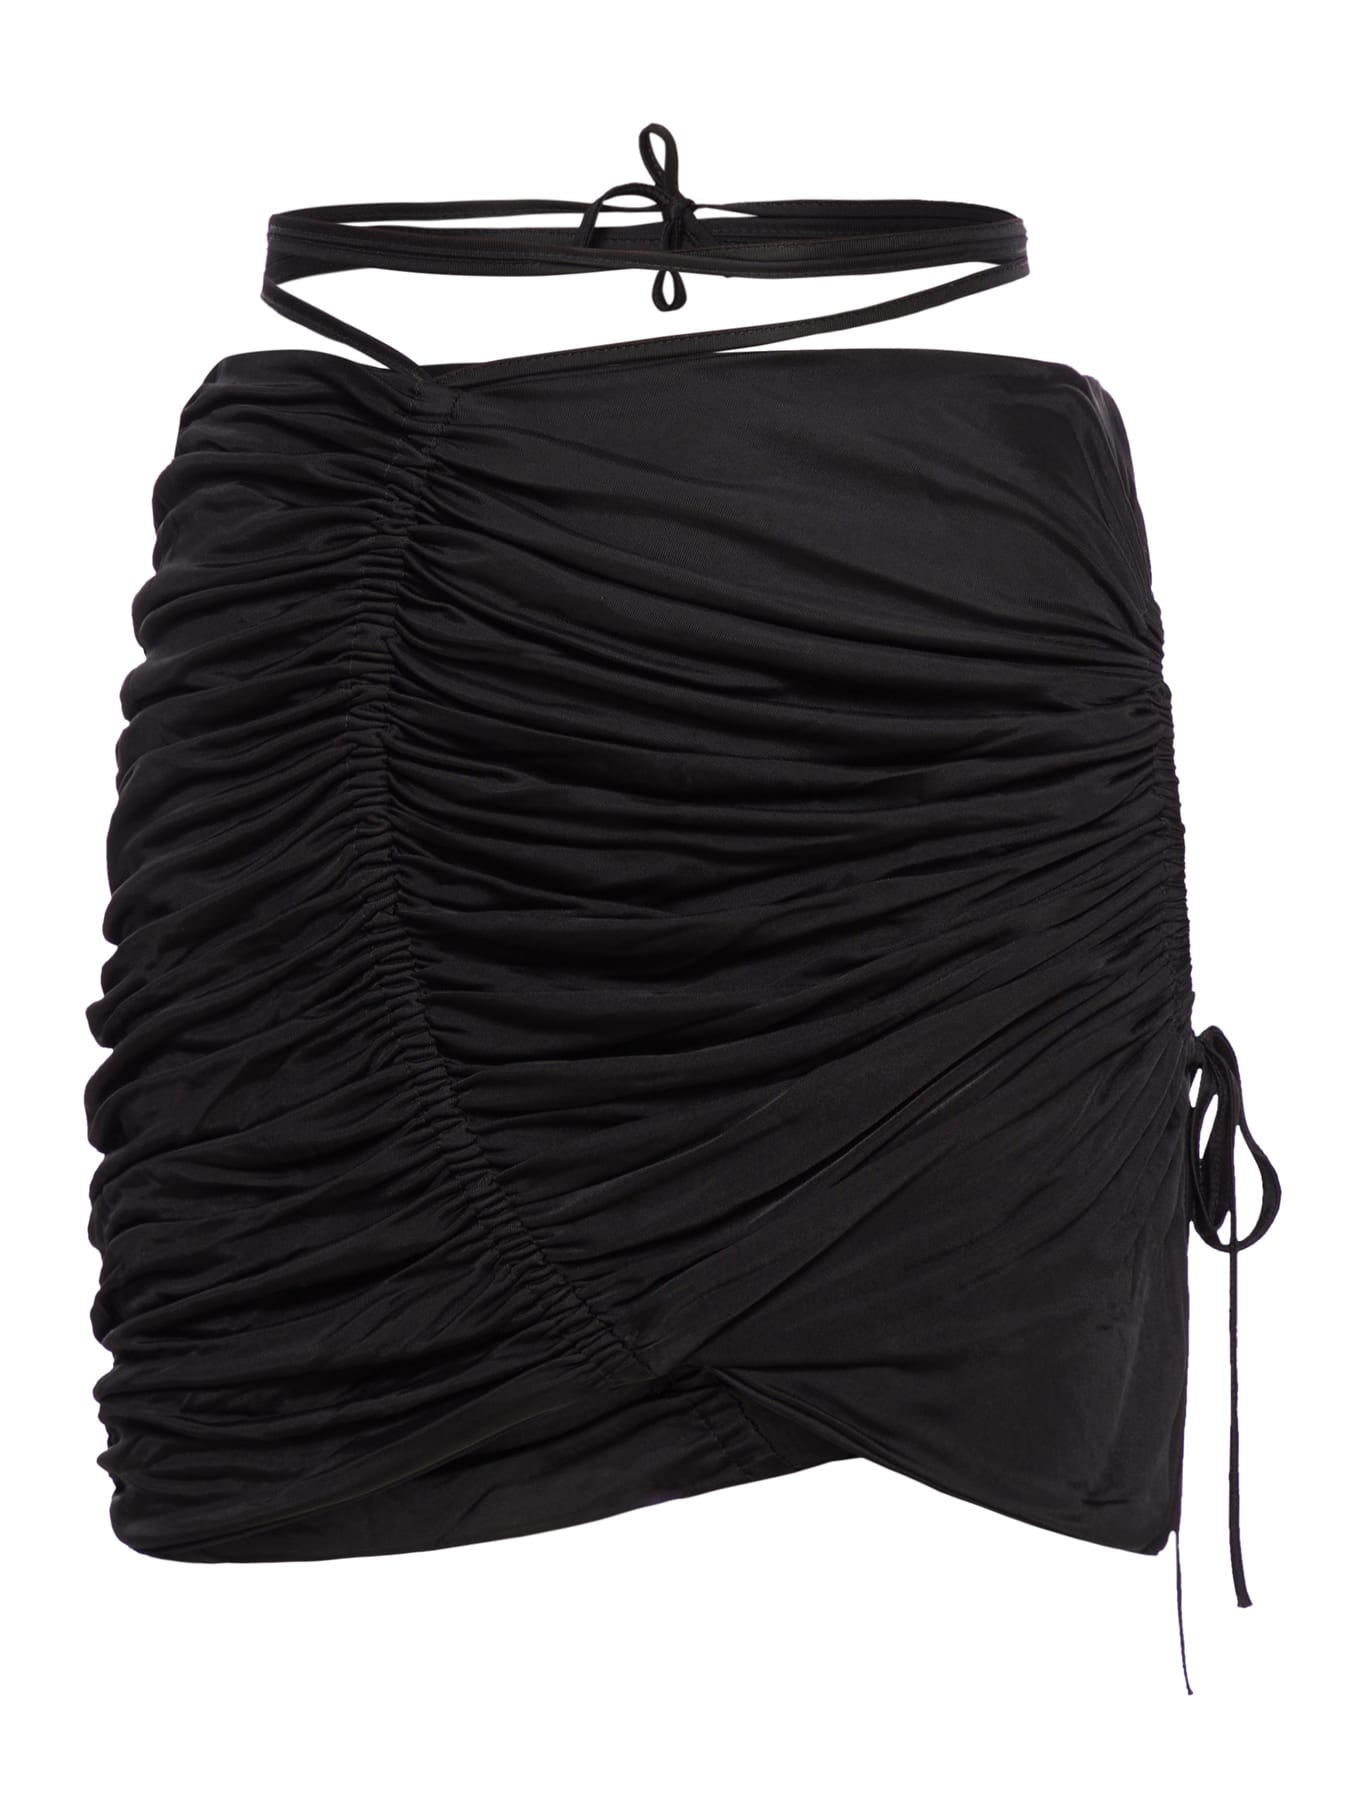 ANDREÄDAMO DRAPED JERSEY MINI SKIRT WITH CUT-OUT AN